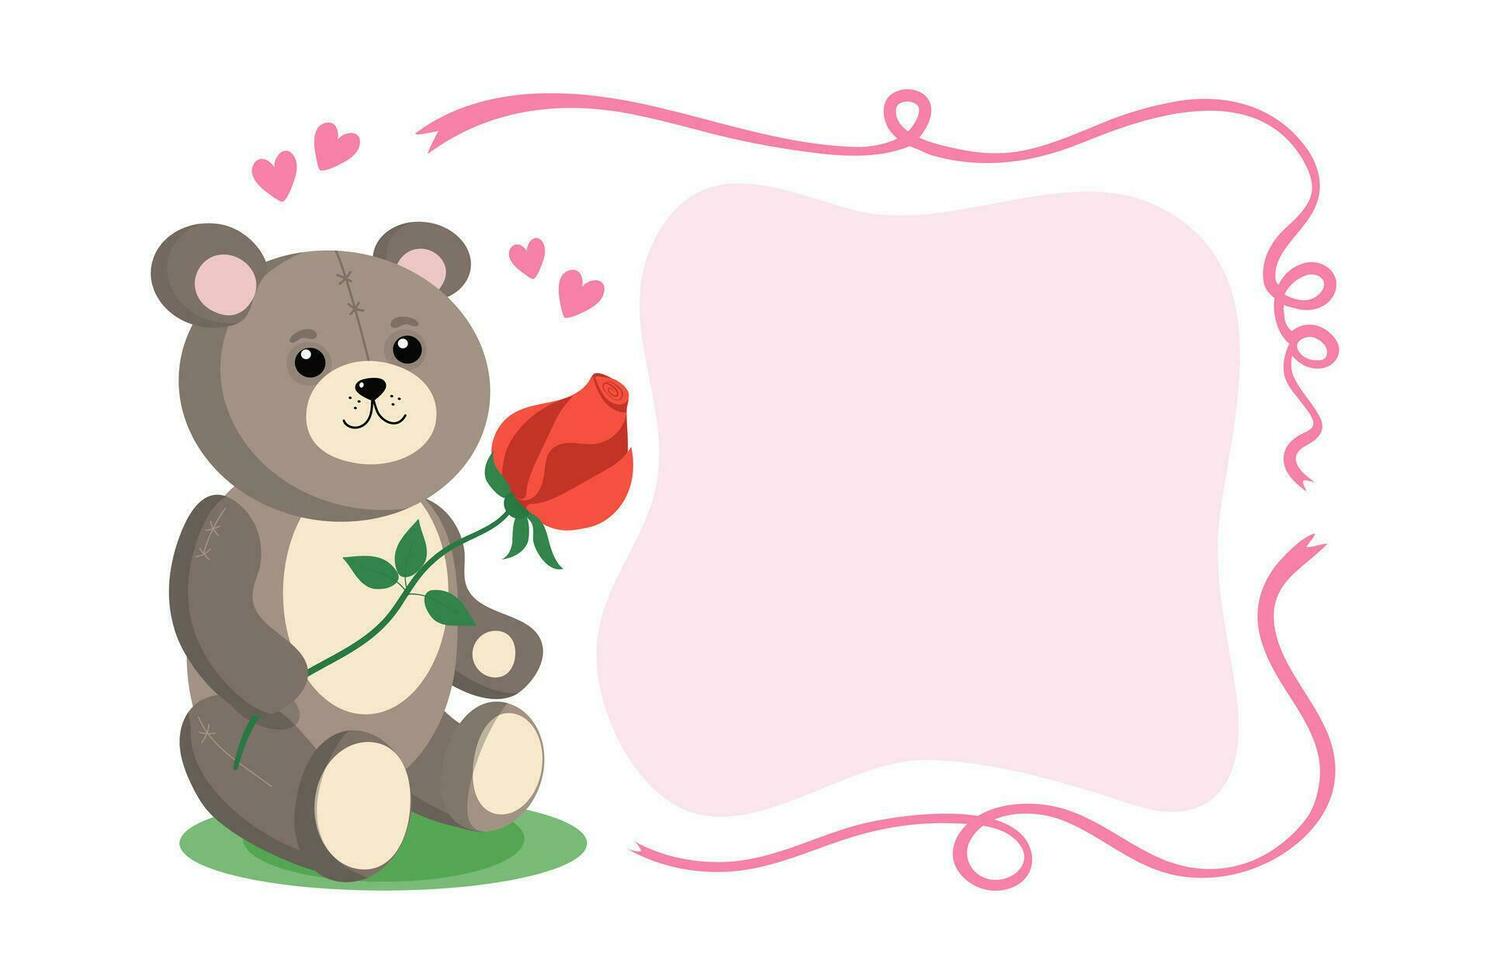 Teddy Bear frame. Postcard, flyer mockup. Cute toy bear with a flower. A smiling teddy bear with a rose, ribbons and hearts is sitting. Soft brown cartoon toy. Valentine's Day, love. vector